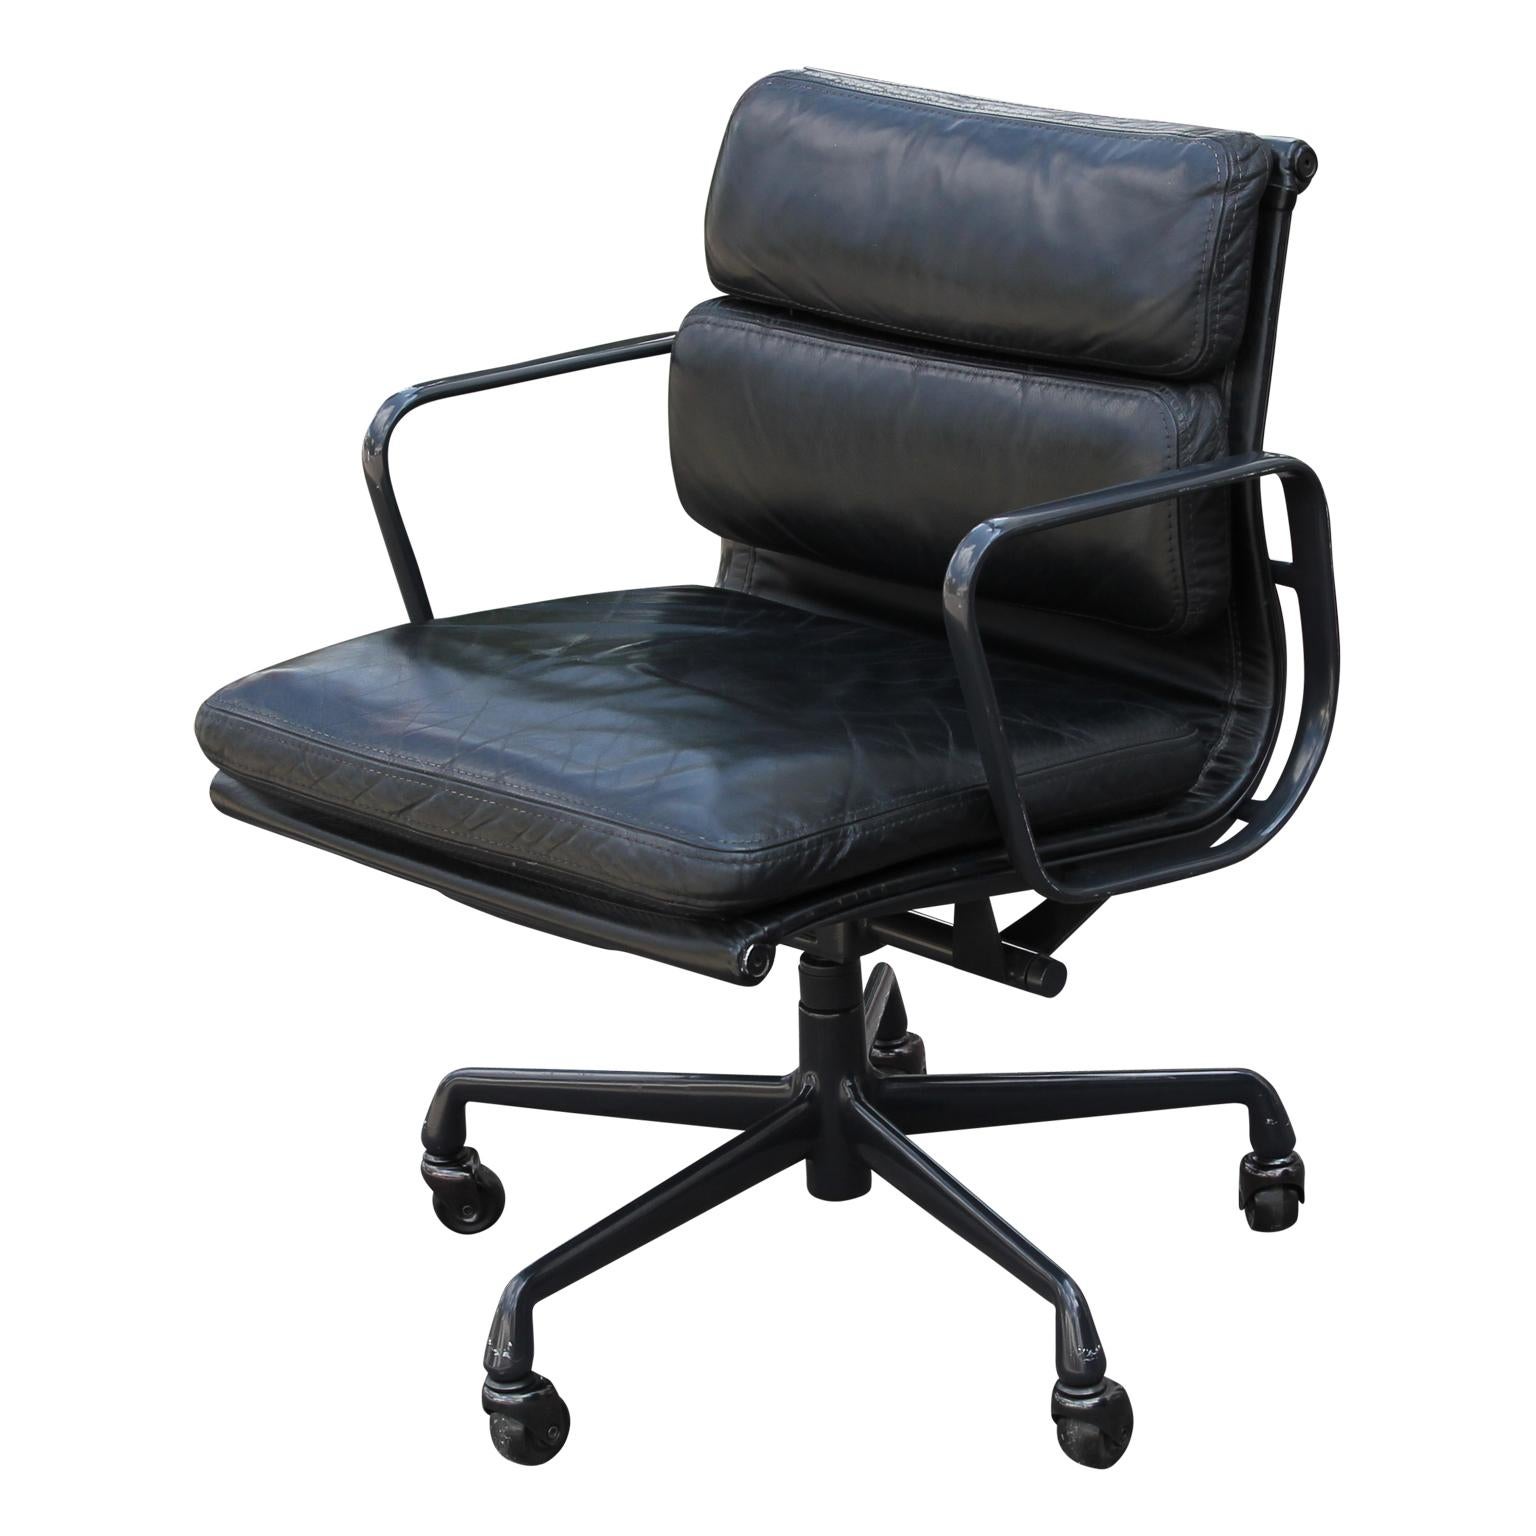 Modern black leather and black aluminum soft padded office chair. The chair swivels and is on wheels. It was designed by Eames for Herman Miller.